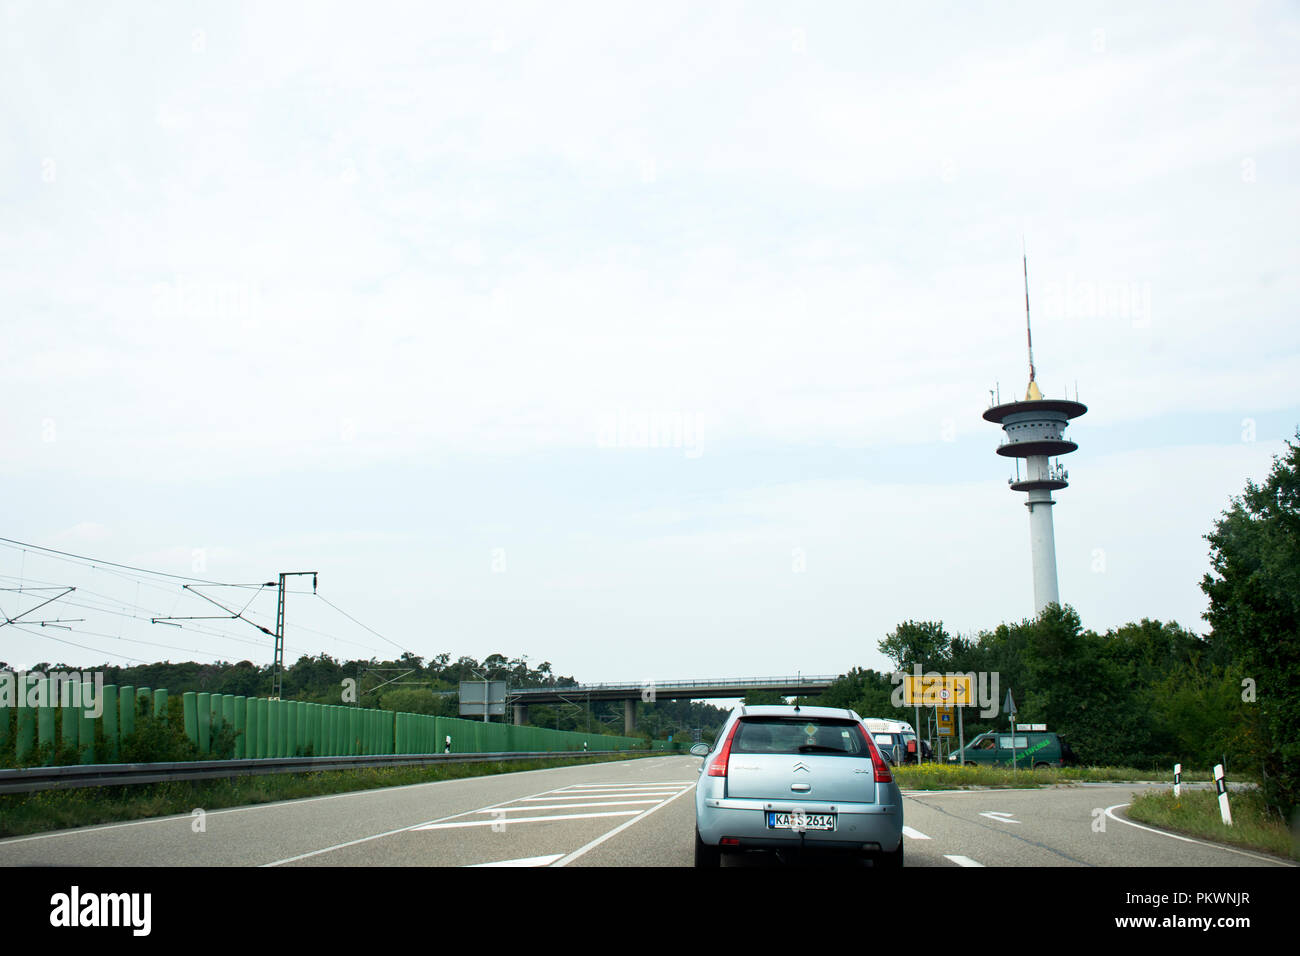 Travelers people driving car on the road go to Speyer town passed Worth am Rhein village at Germersheim on August 27, 2017 in Rhineland-Palatinate, Ge Stock Photo